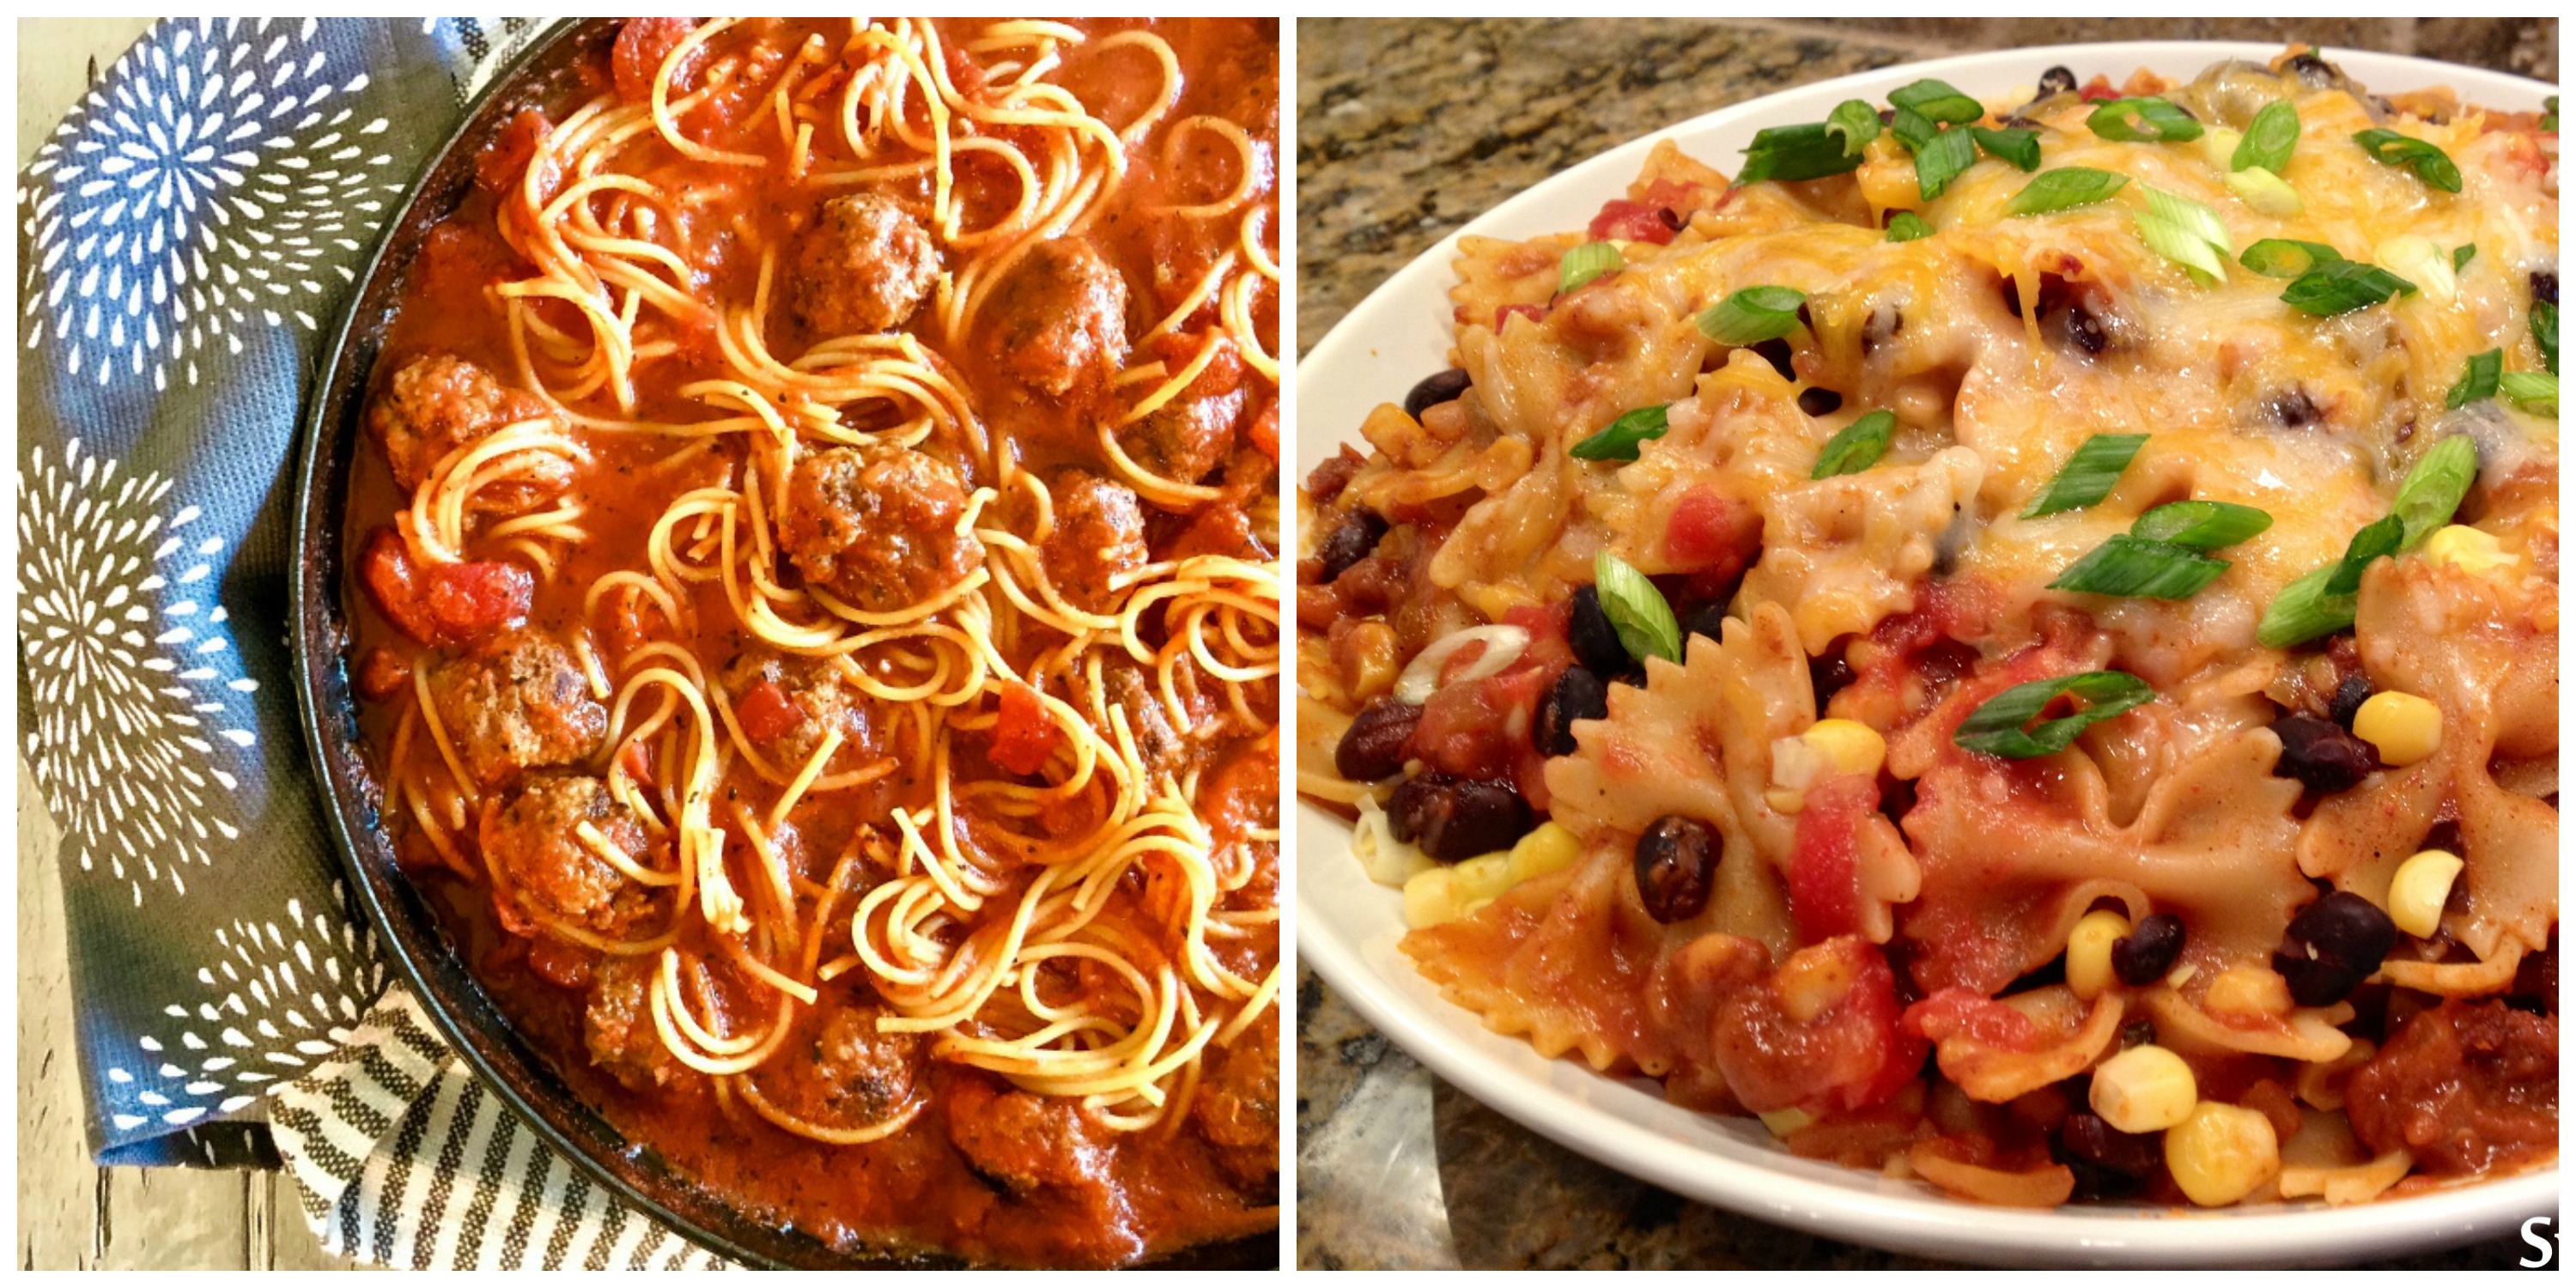 Spaghetti and meatballs and Mexicali Pasta